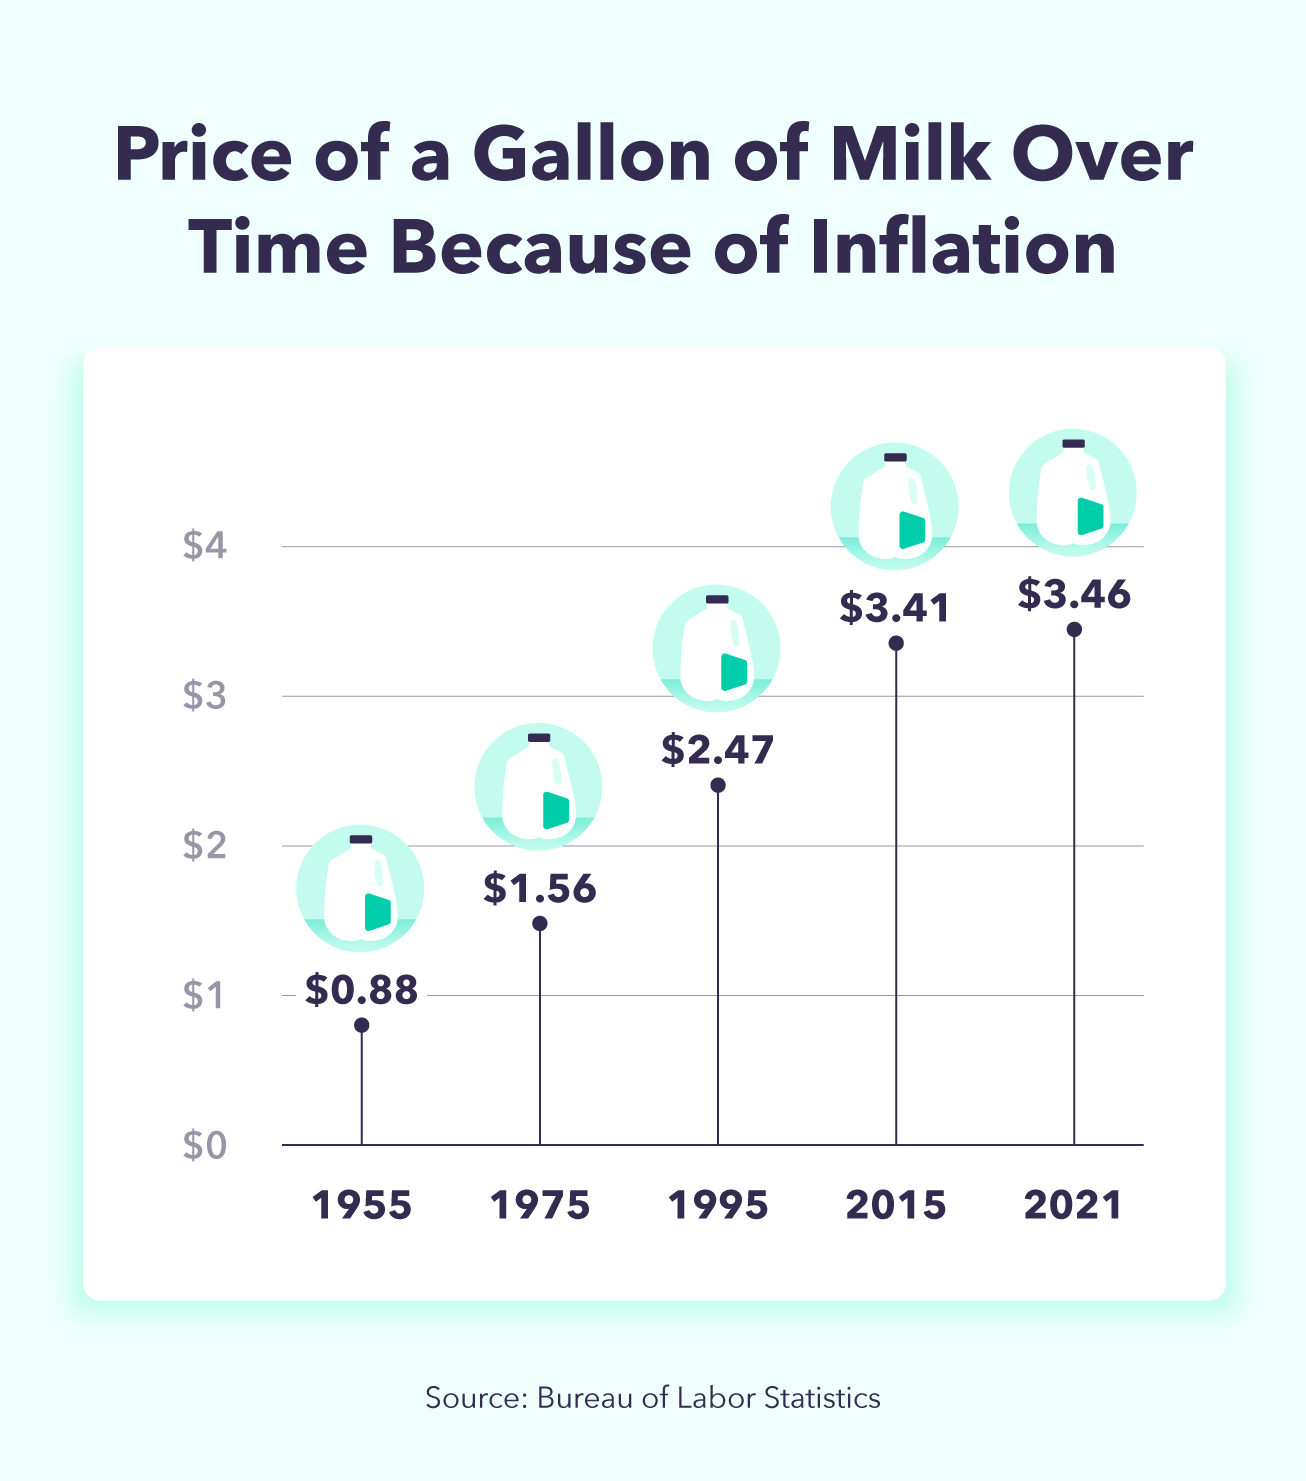 the price of a gallon of milk overtime because of inflation, showing prices going up over the years